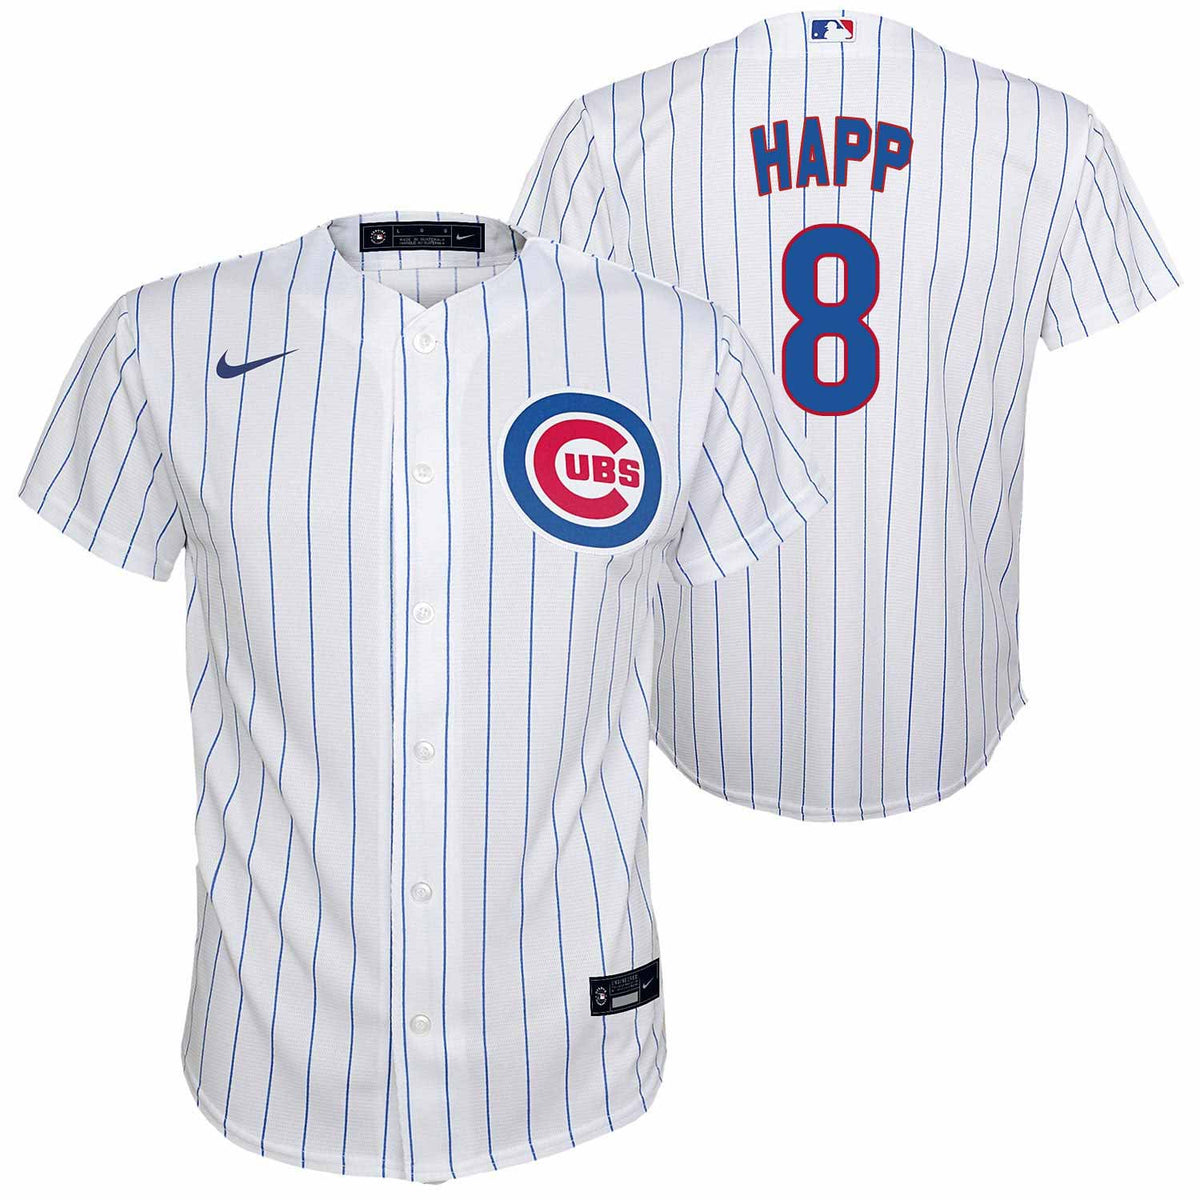 Nike Youth Nico Hoerner Chicago Cubs White Home Replica Jersey